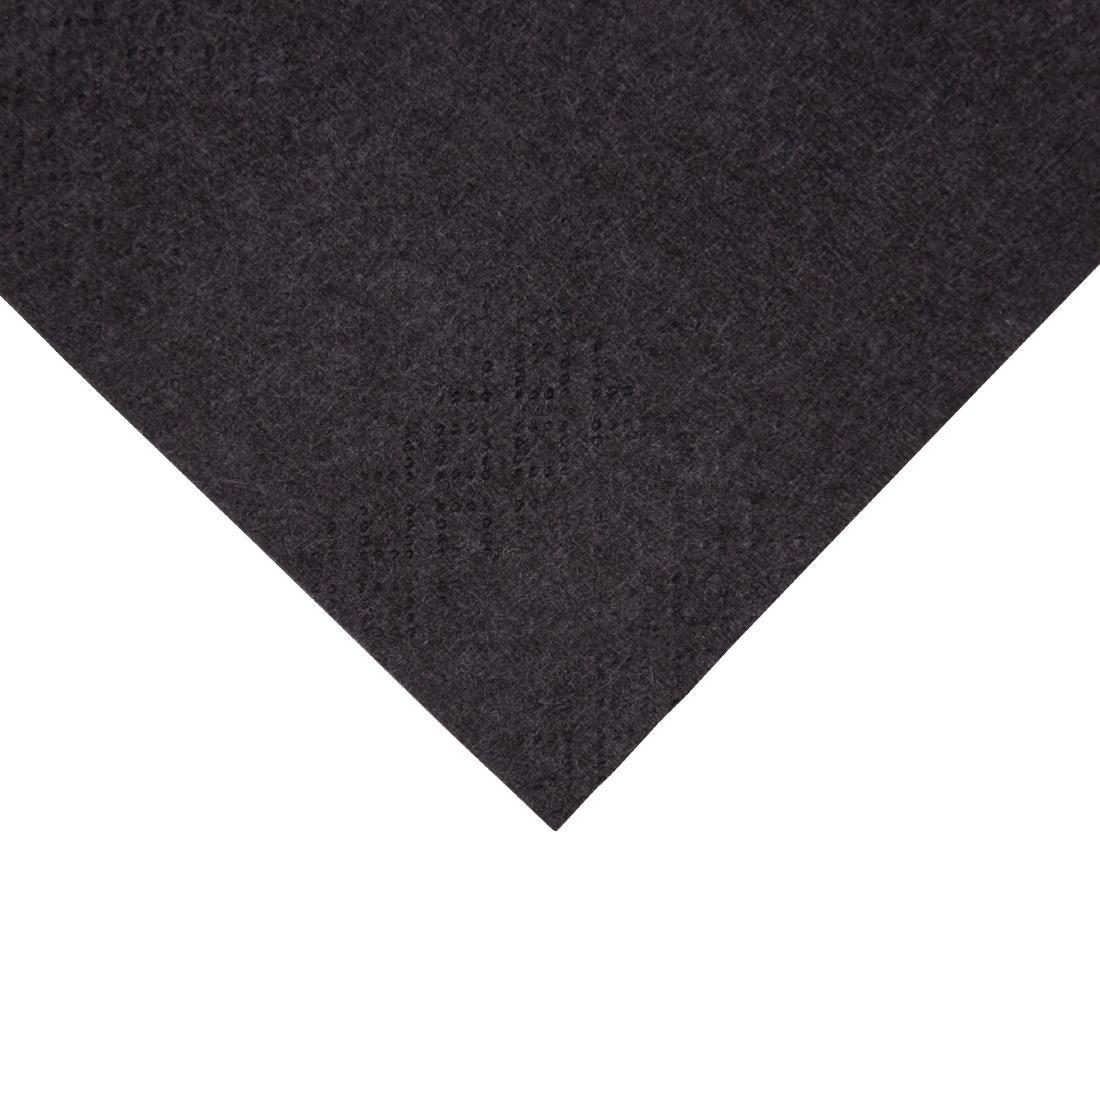 Fiesta Recyclable Lunch Napkin Black 33x33cm 2ply 1/8 Fold (Pack of 2000) - FE233  - 2